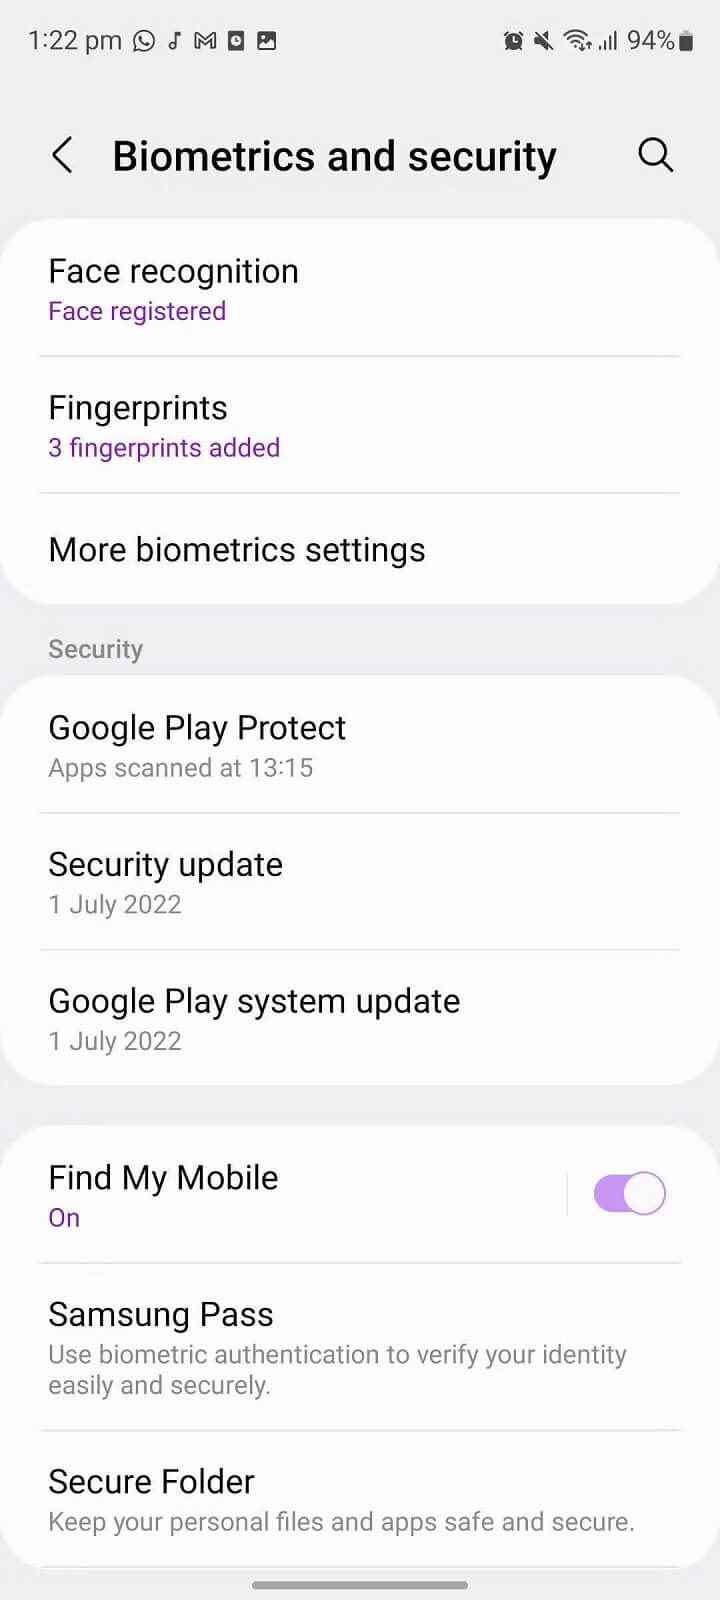 1670810072 312 Whats new in Samsung One UI 5